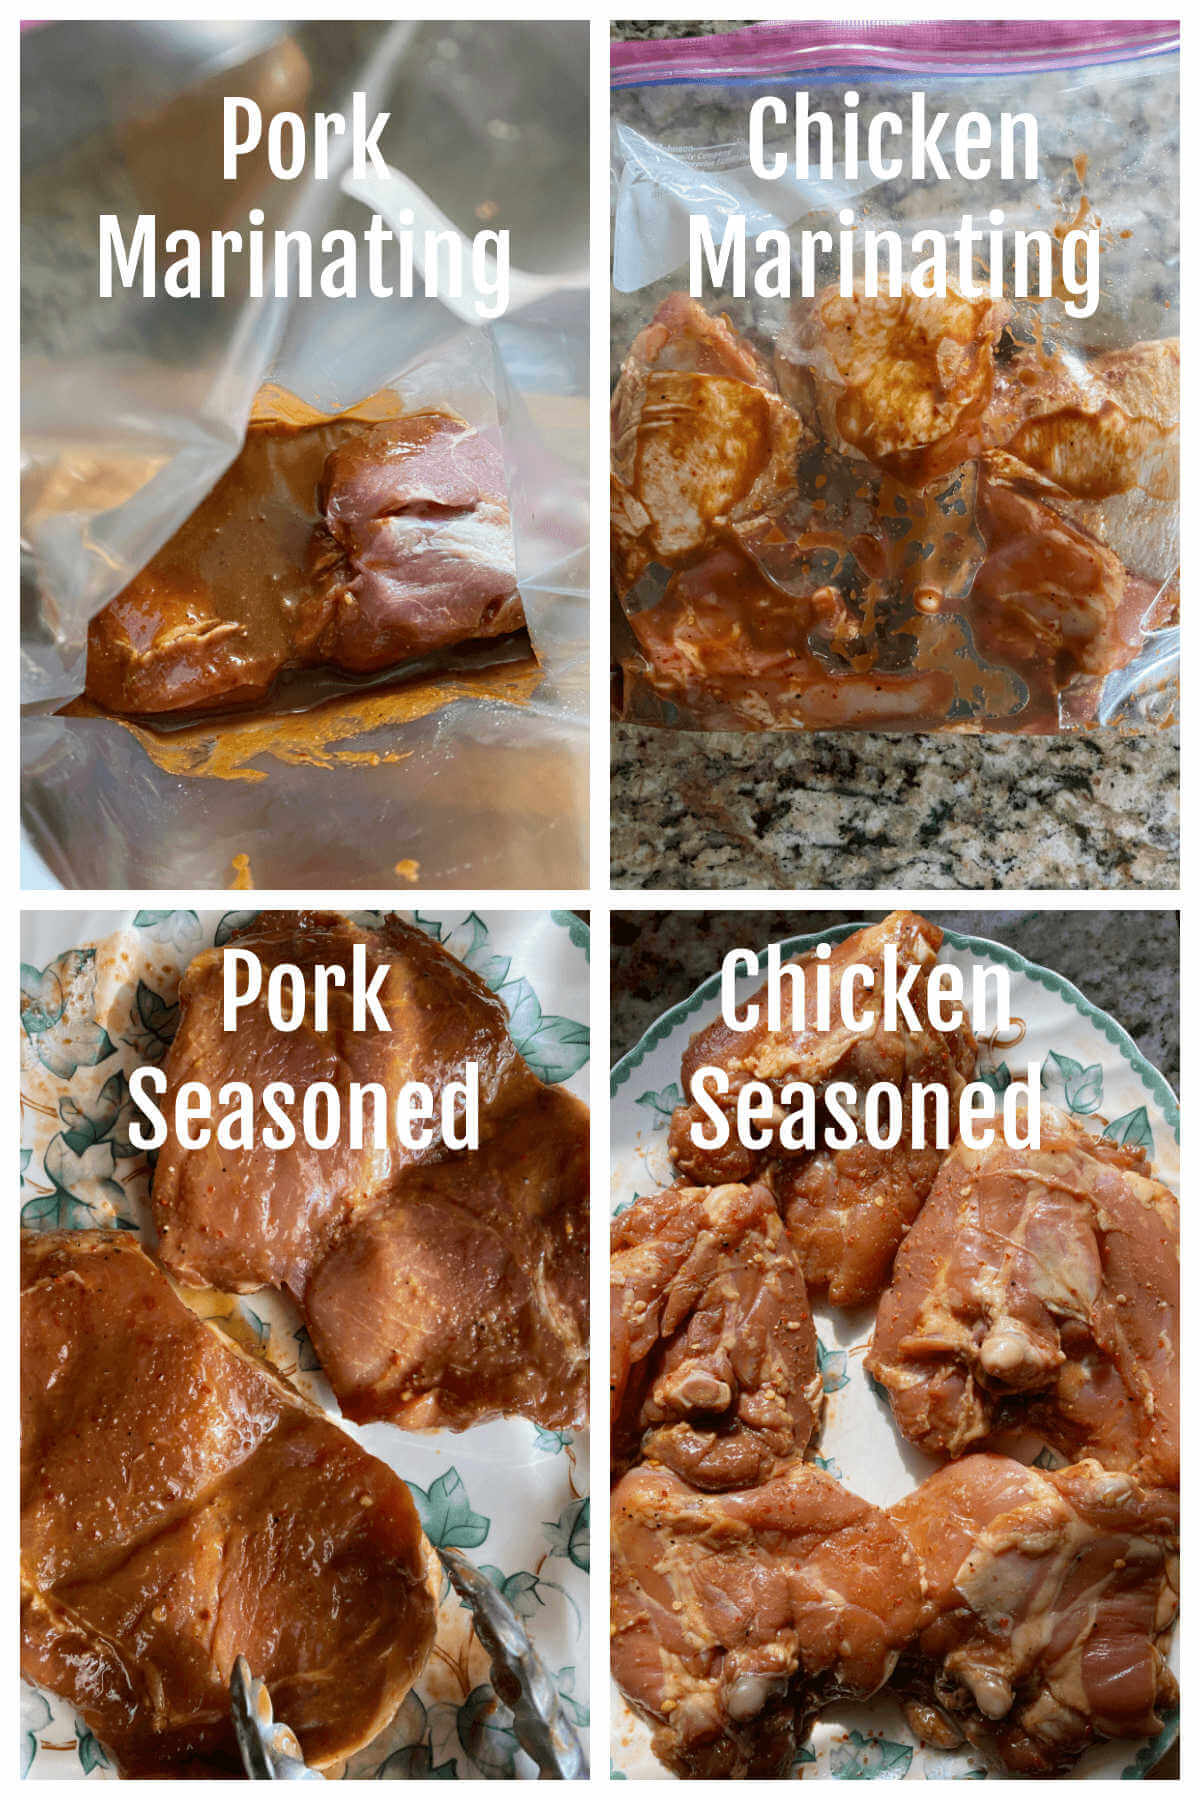 Marinating both pork chops and chicken thighs in plastic bags.